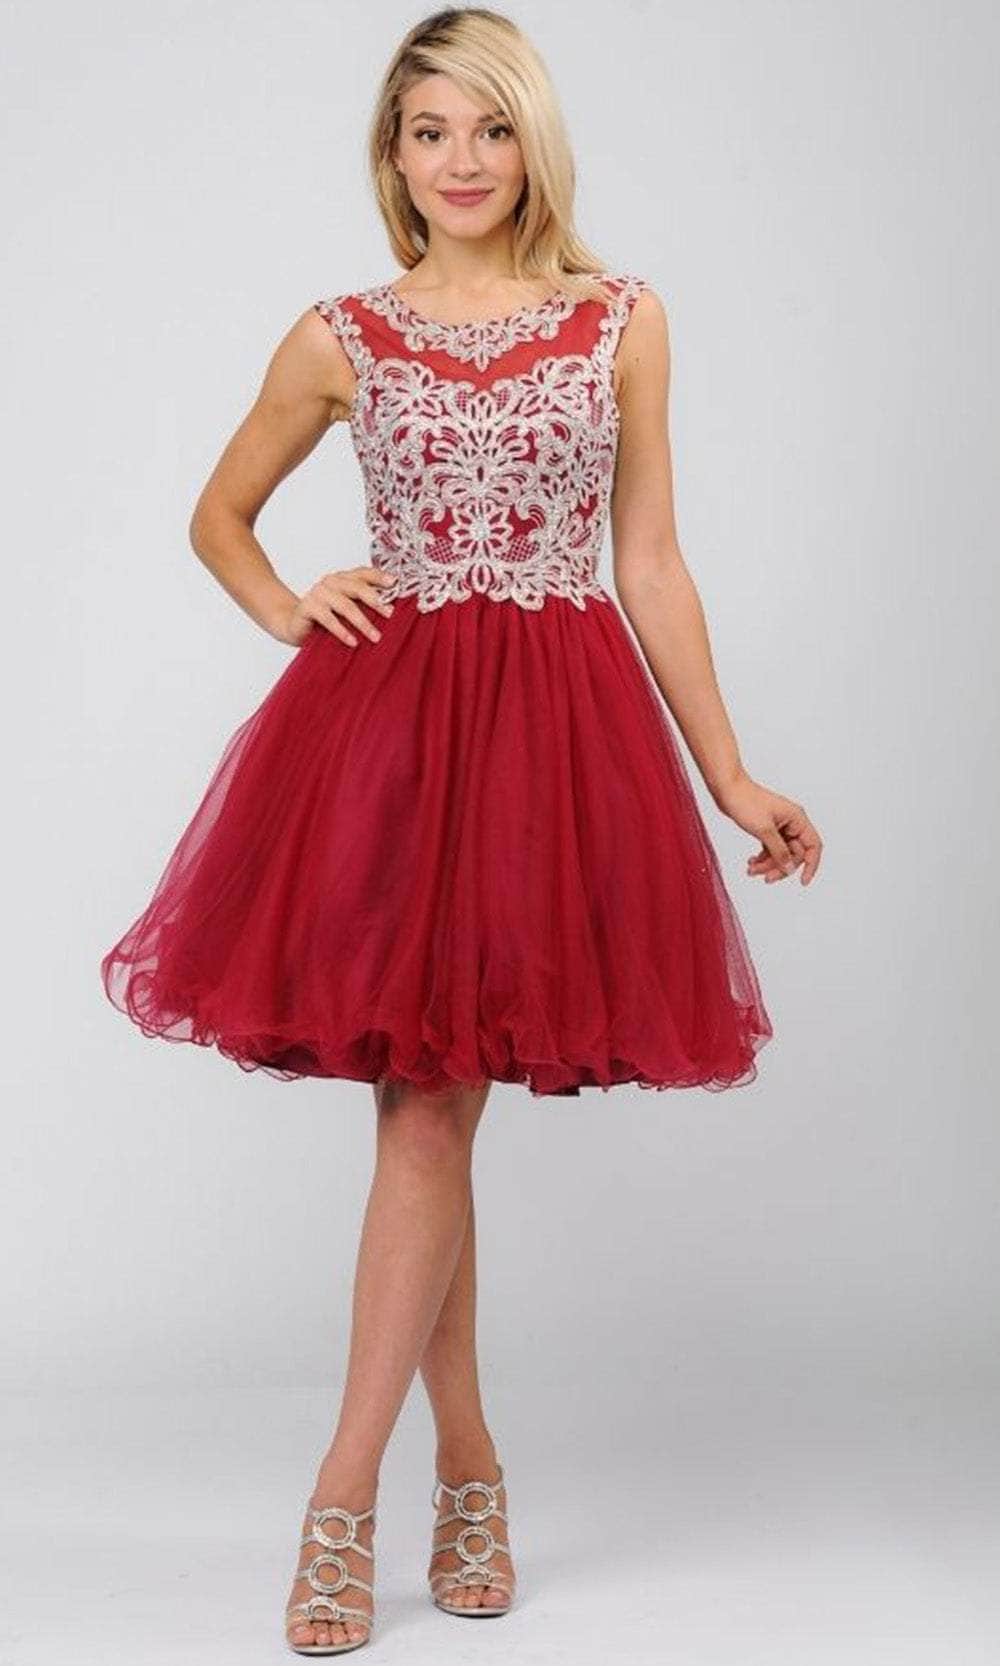 Image of Poly USA 8302 - Lace Applique Scoop Neck Cocktail Dress